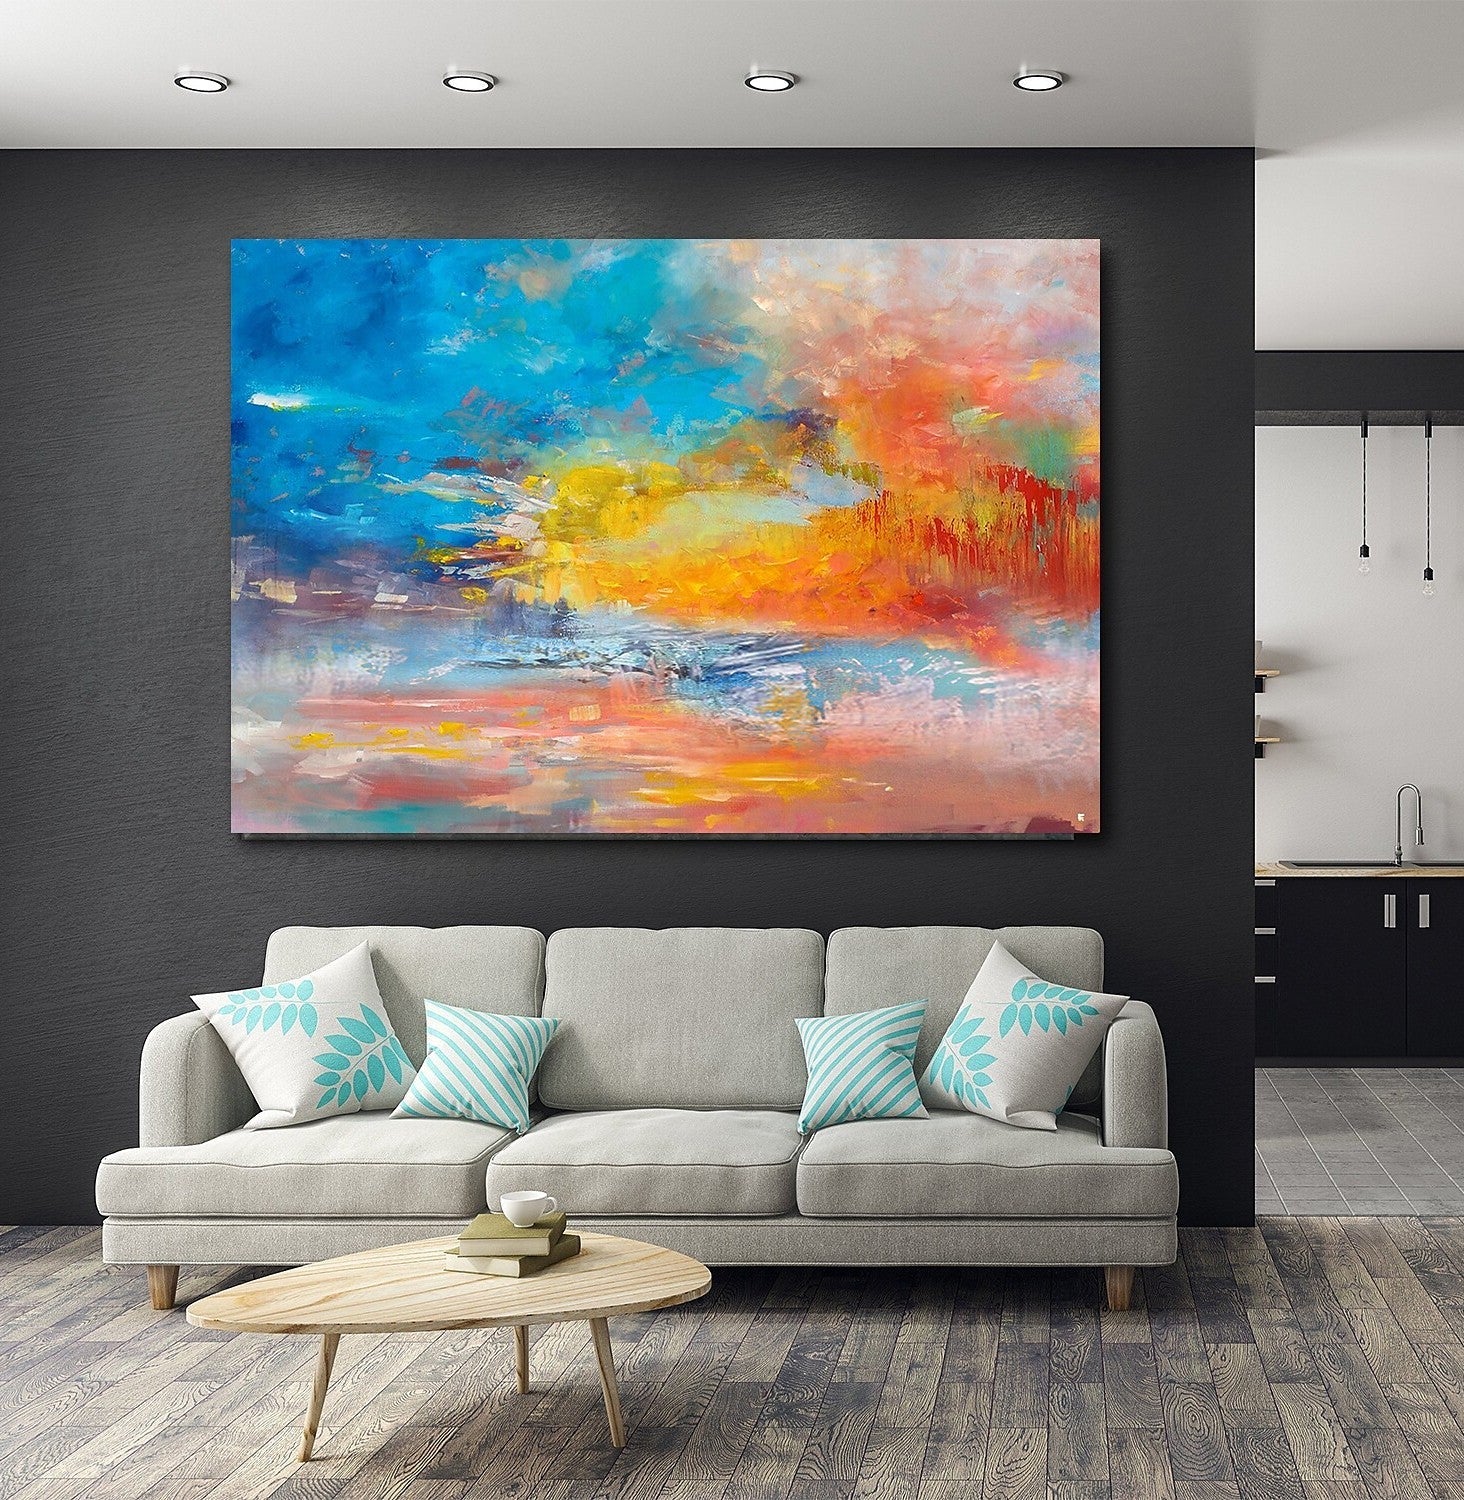 Large Paintings for Living Room, Buy Paintings Online, Wall Art Paintings for Bedroom, Simple Modern Art, Simple Abstract Art-Grace Painting Crafts